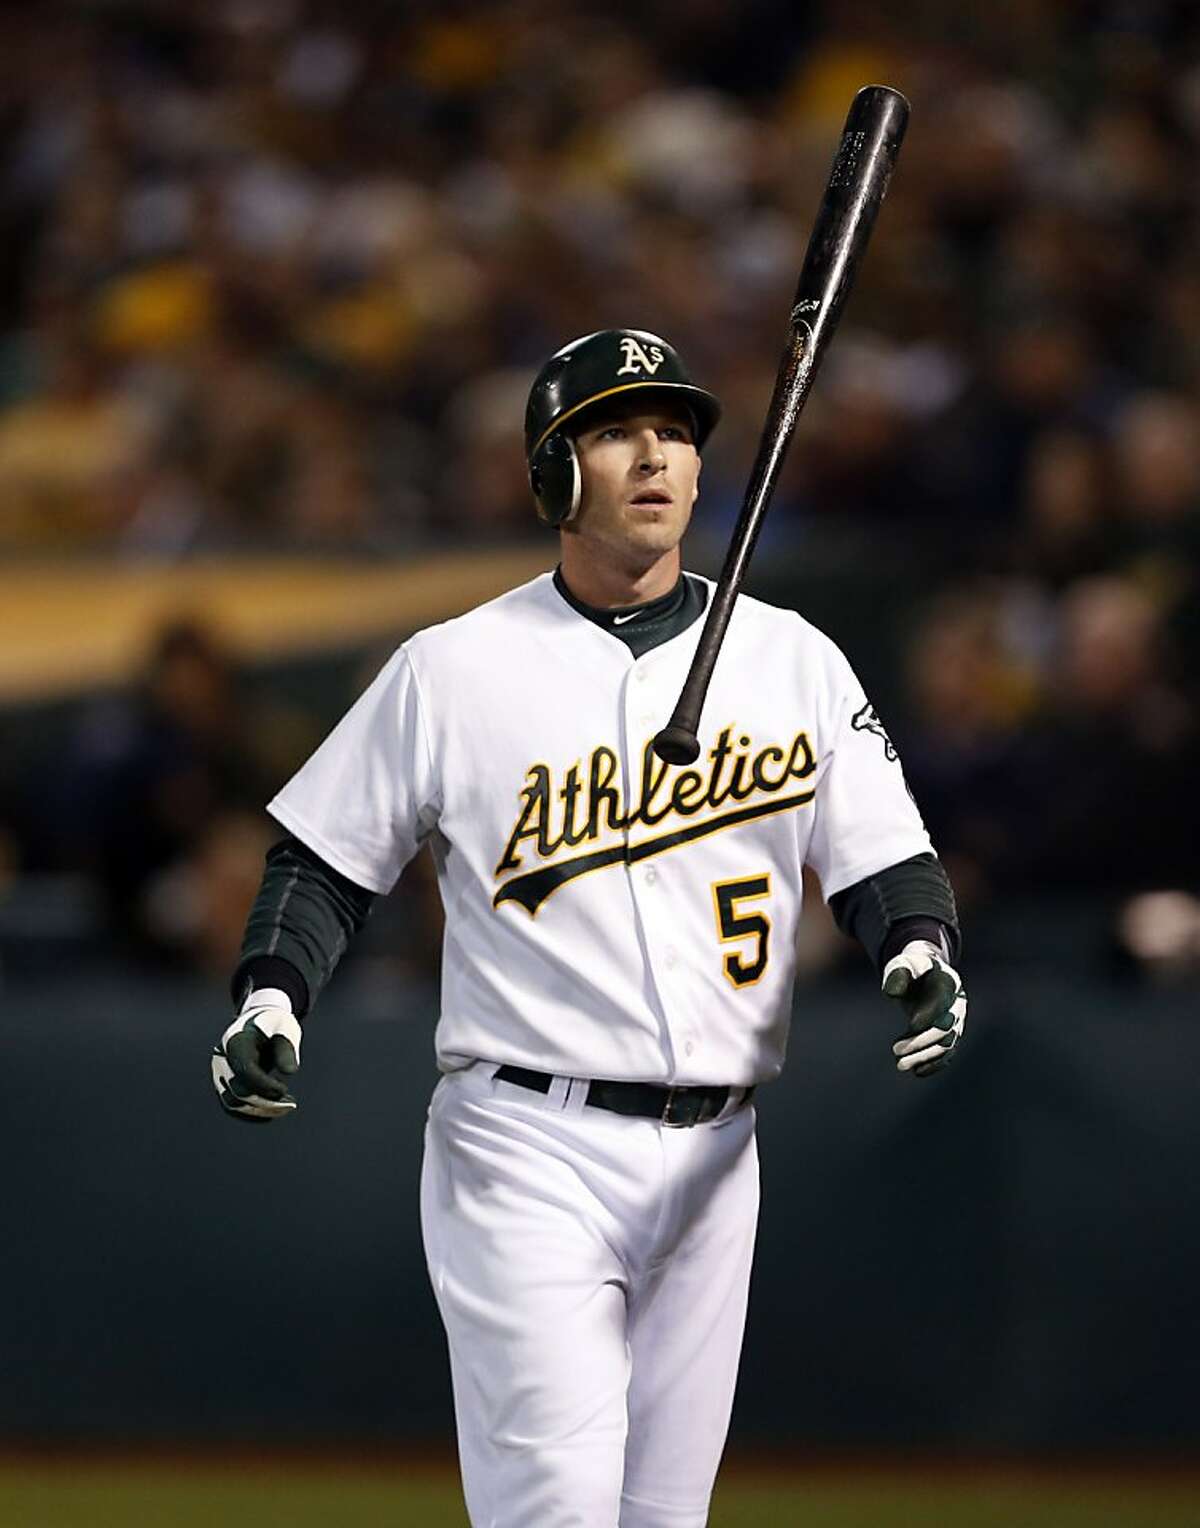 Stephen Drew flips the bat after striking out in the first inning. The Oakland Athletics played the Detroit Tigers in game 5 of the ALDS at O.co Coliseum in Oakland, Calif. on Thursday, October 11, 2012.